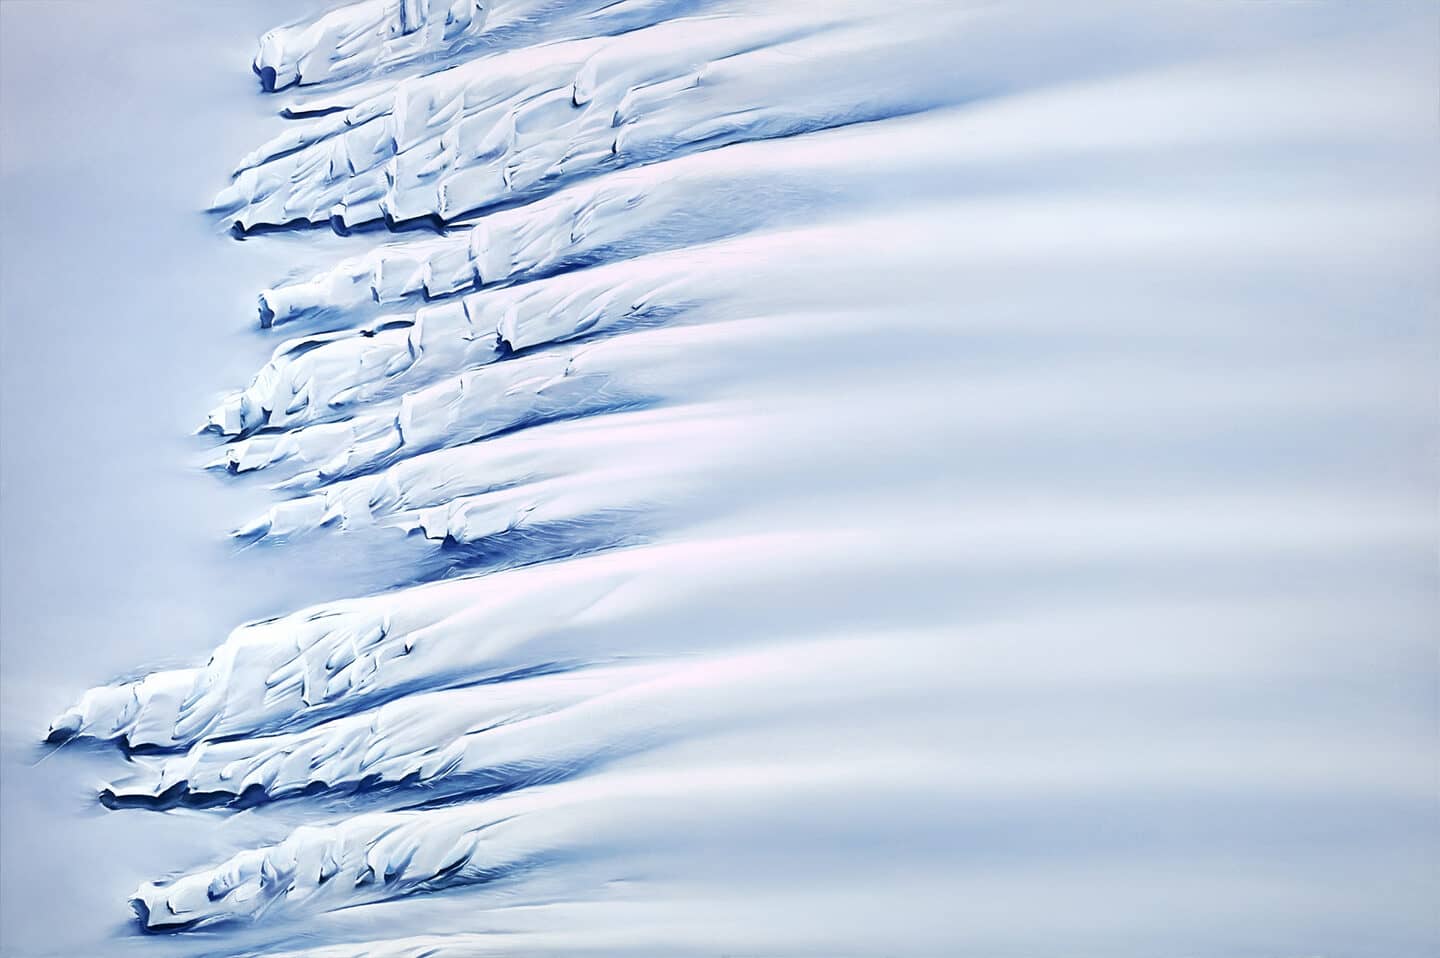 Image: Painting from Zaria Forman of the Getz Ice Shelf in Antarctica viewed from above